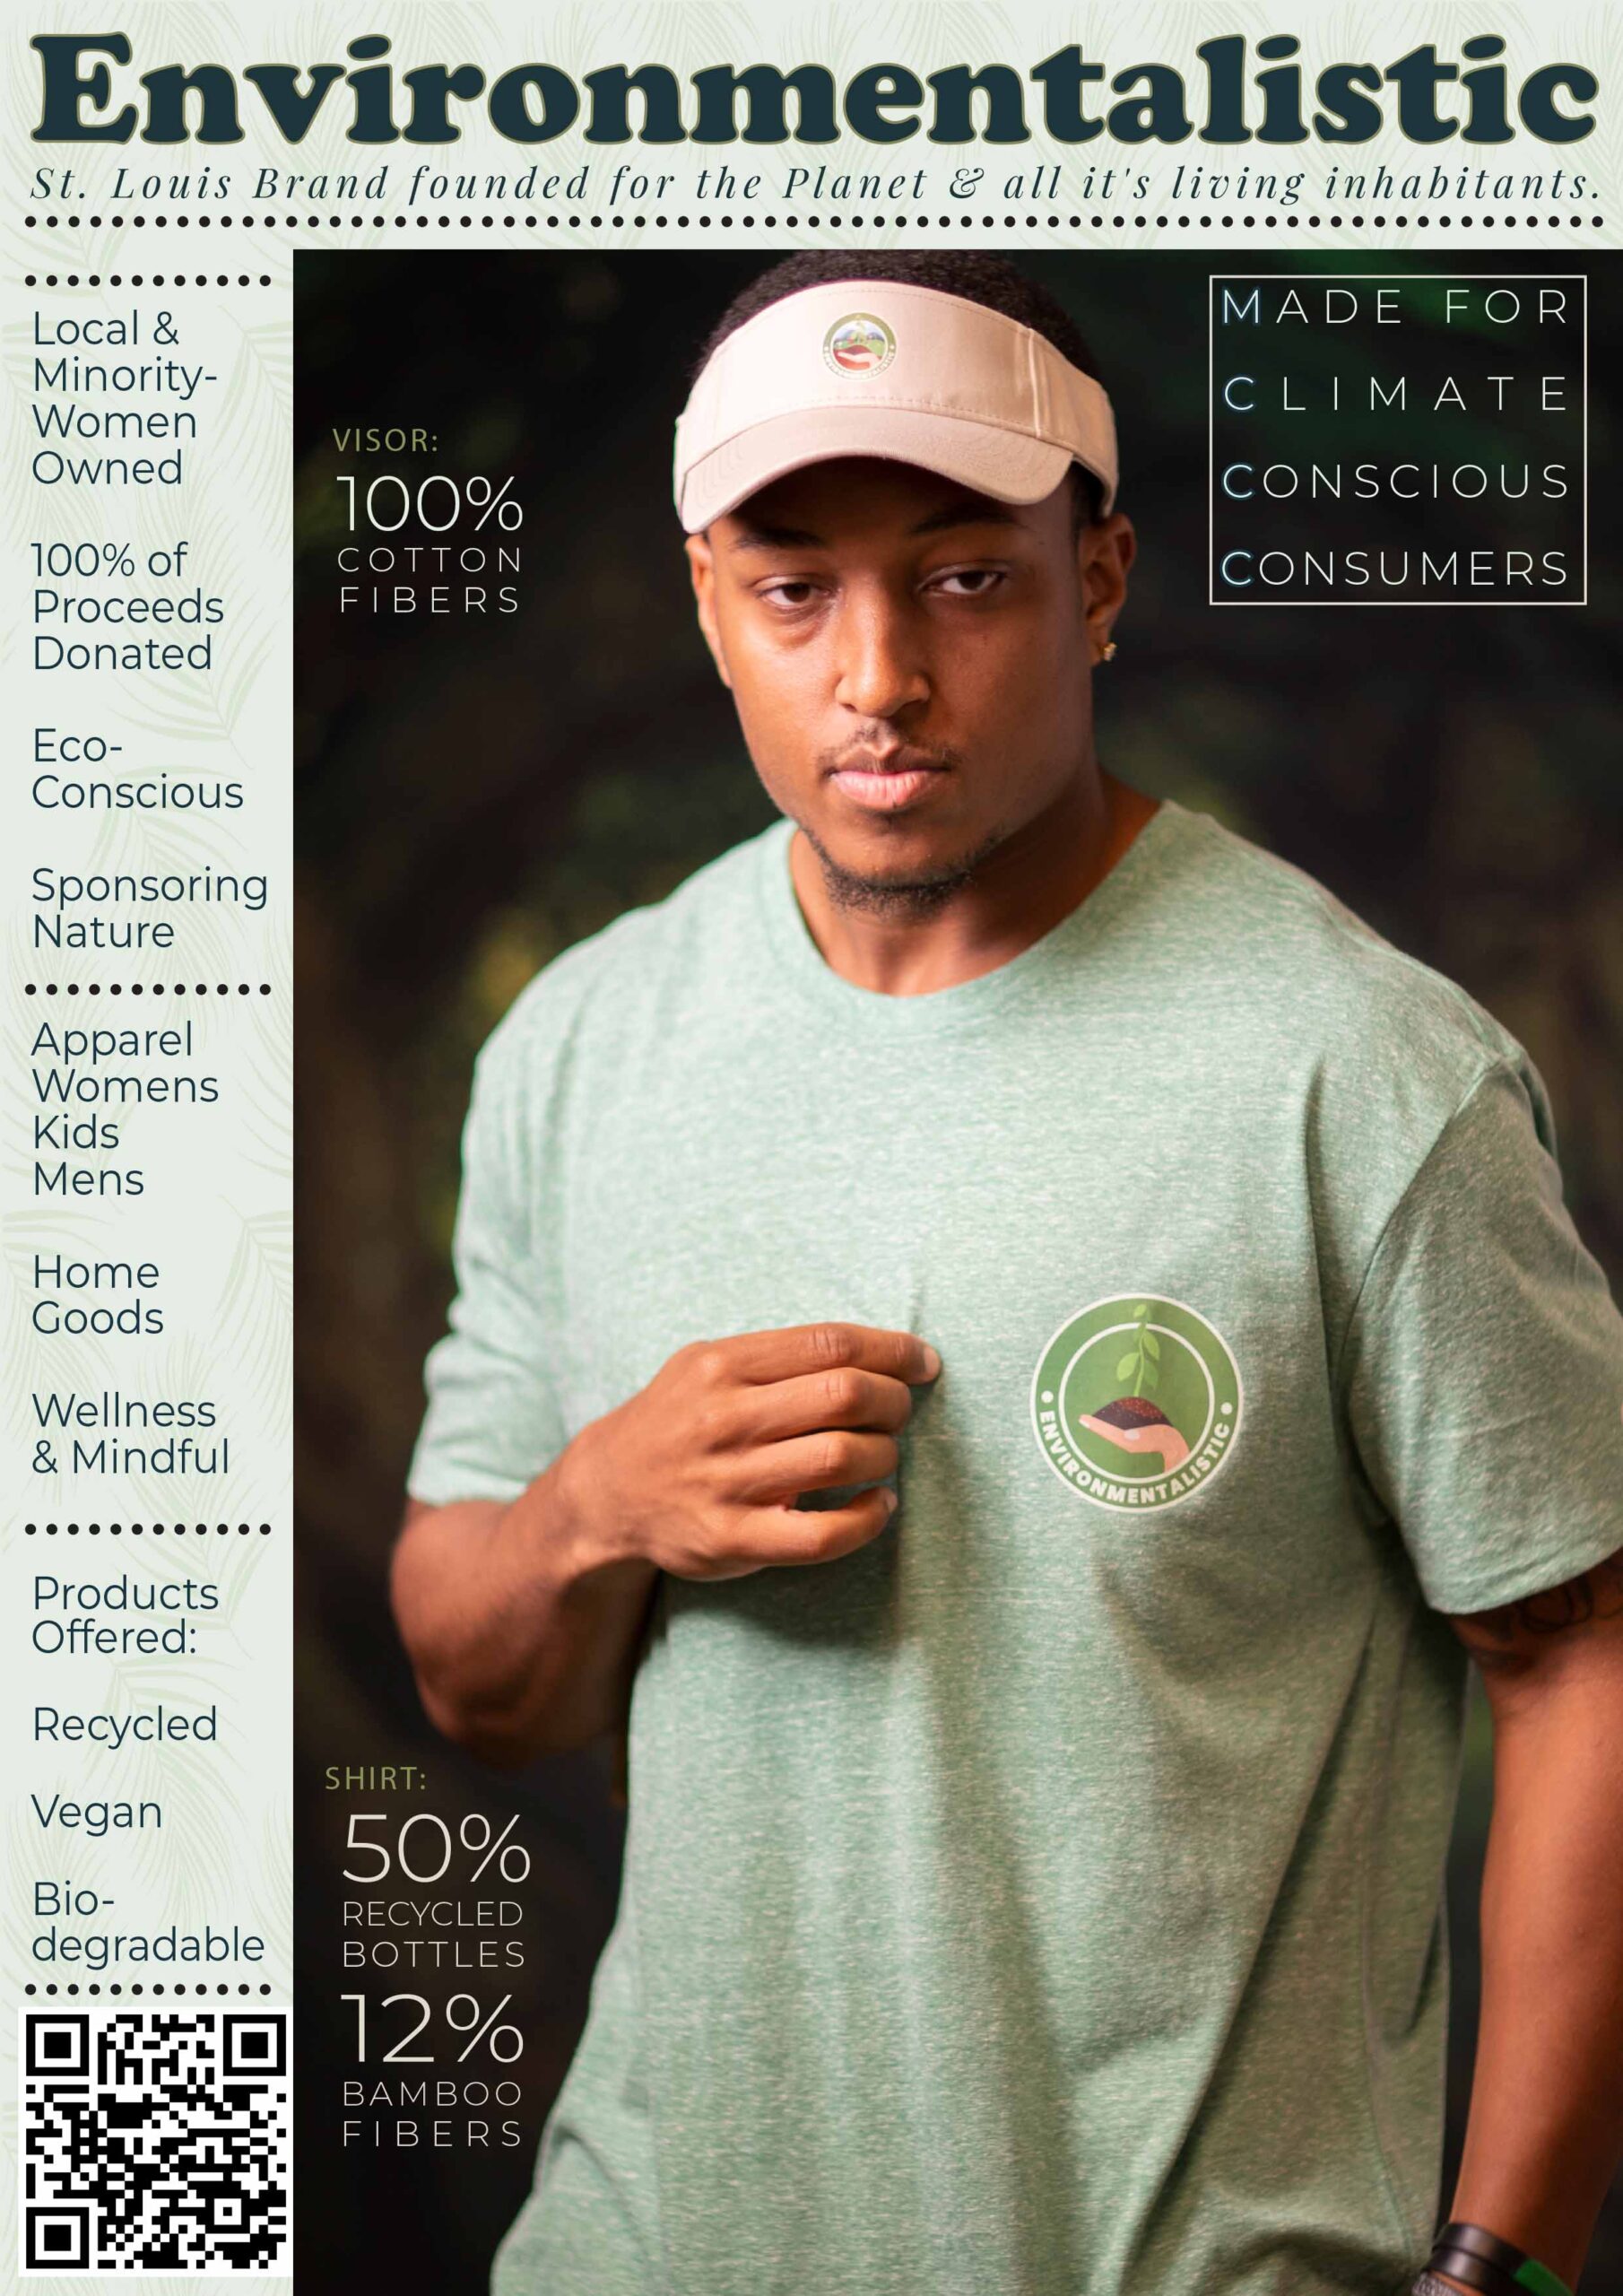 Environmentalistic ad poster promoting 100% cotton visor and eco-friendly t-shirt made from recycled water bottles and bamboo.